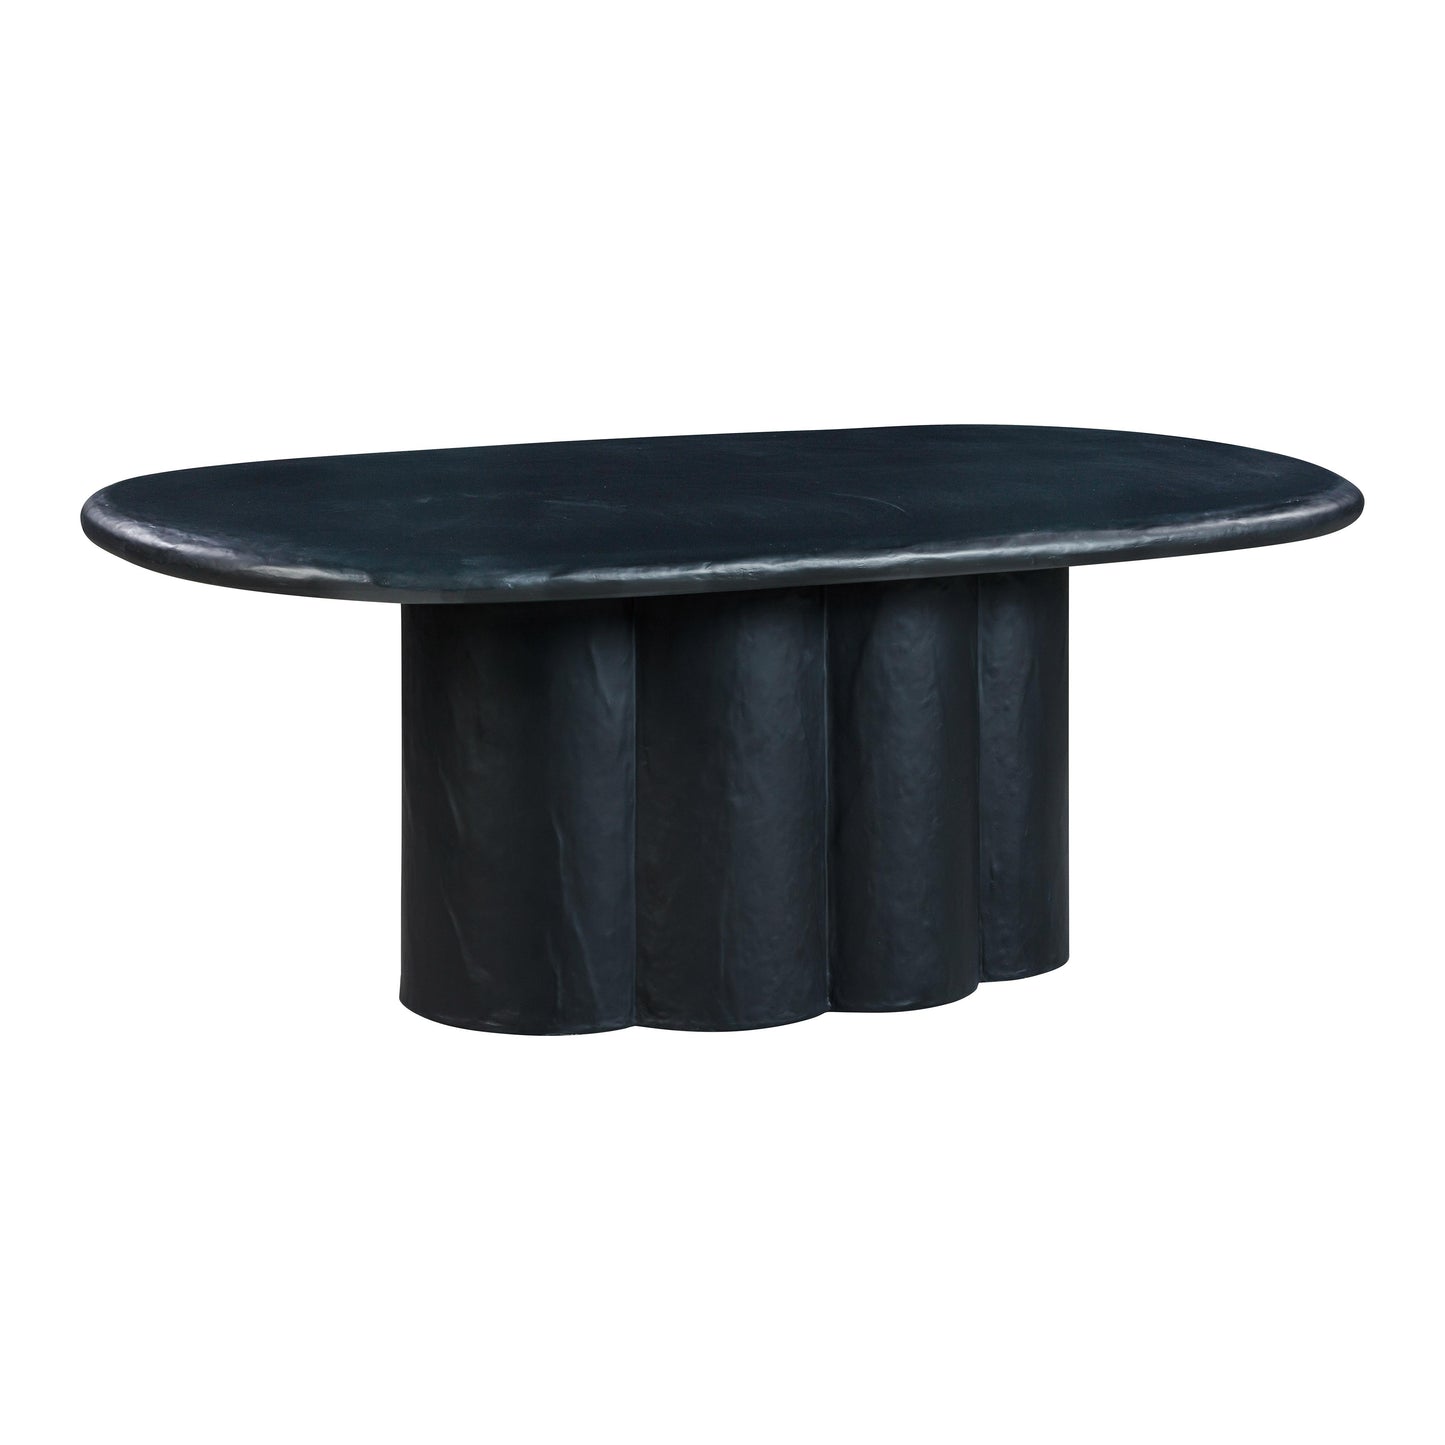 winter black faux plaster oval dining table